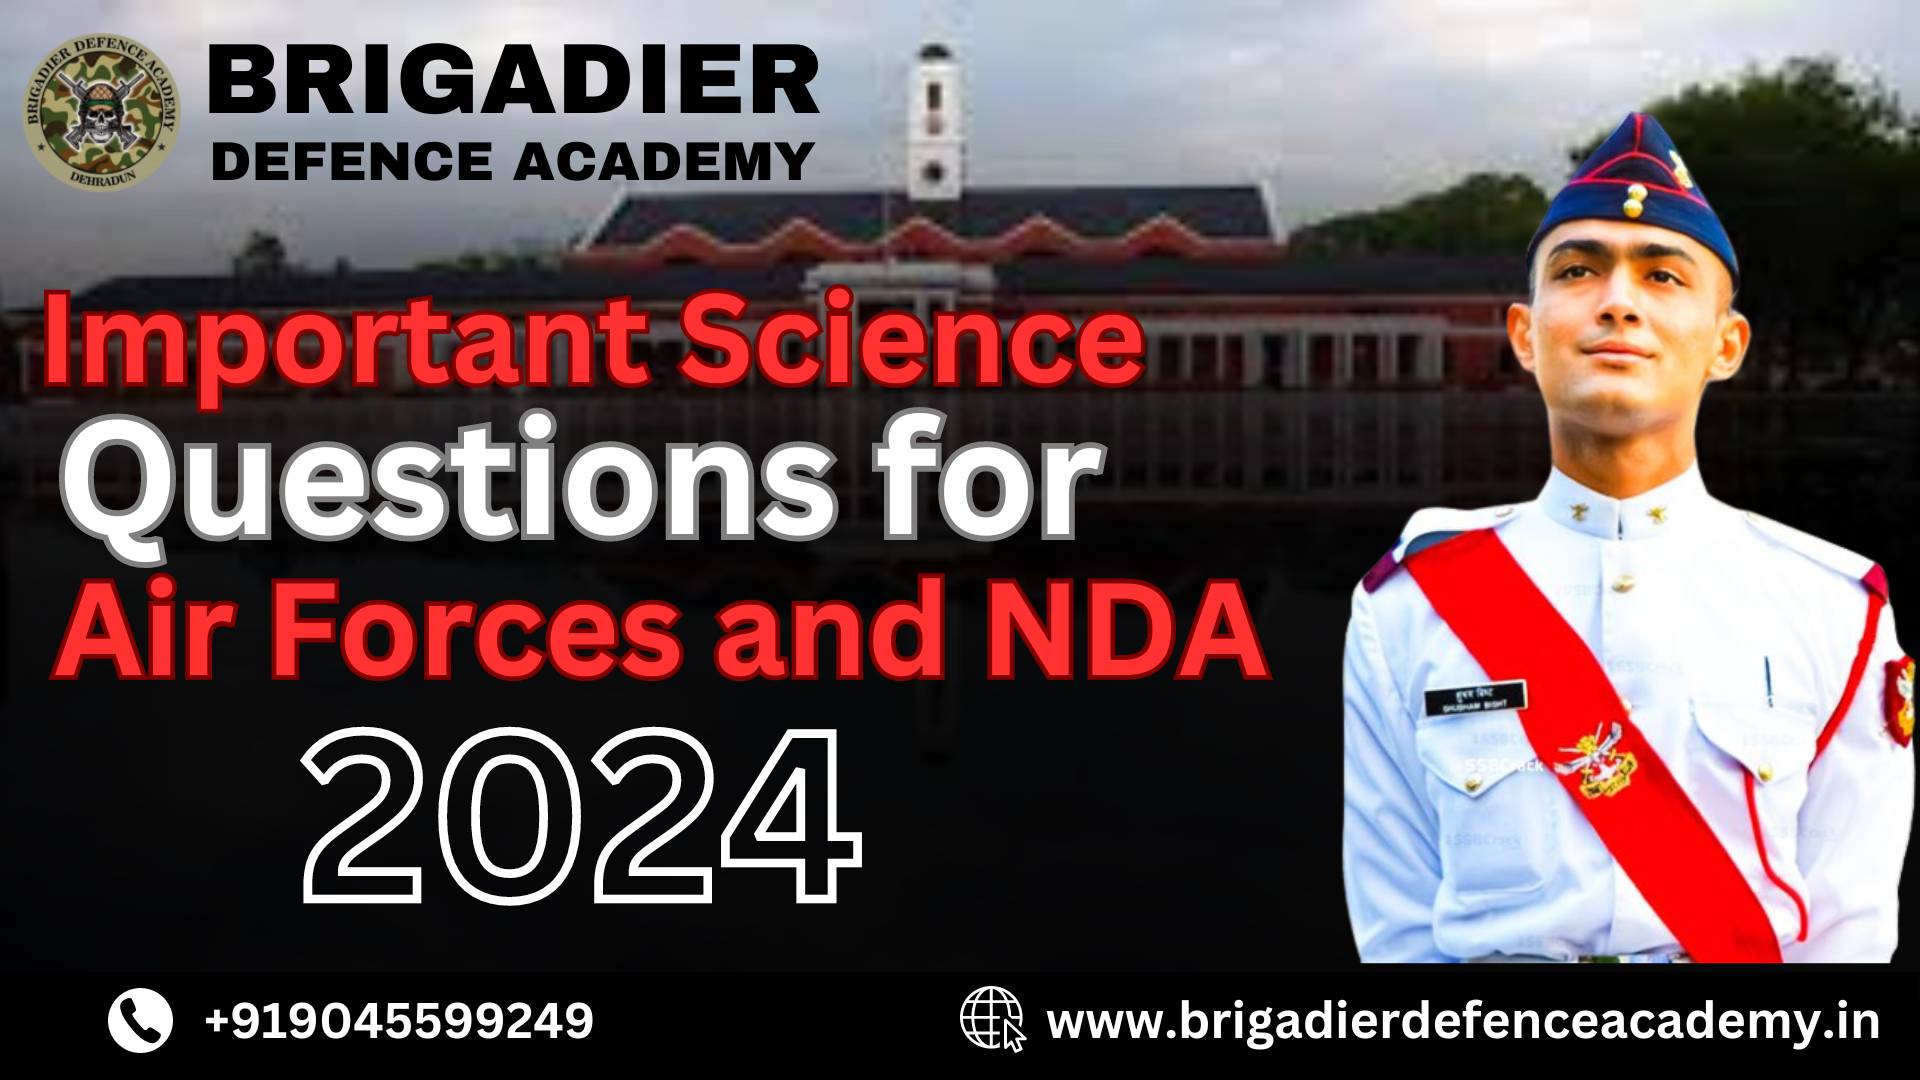 Important Science Questions for Air Forces and NDA 2024